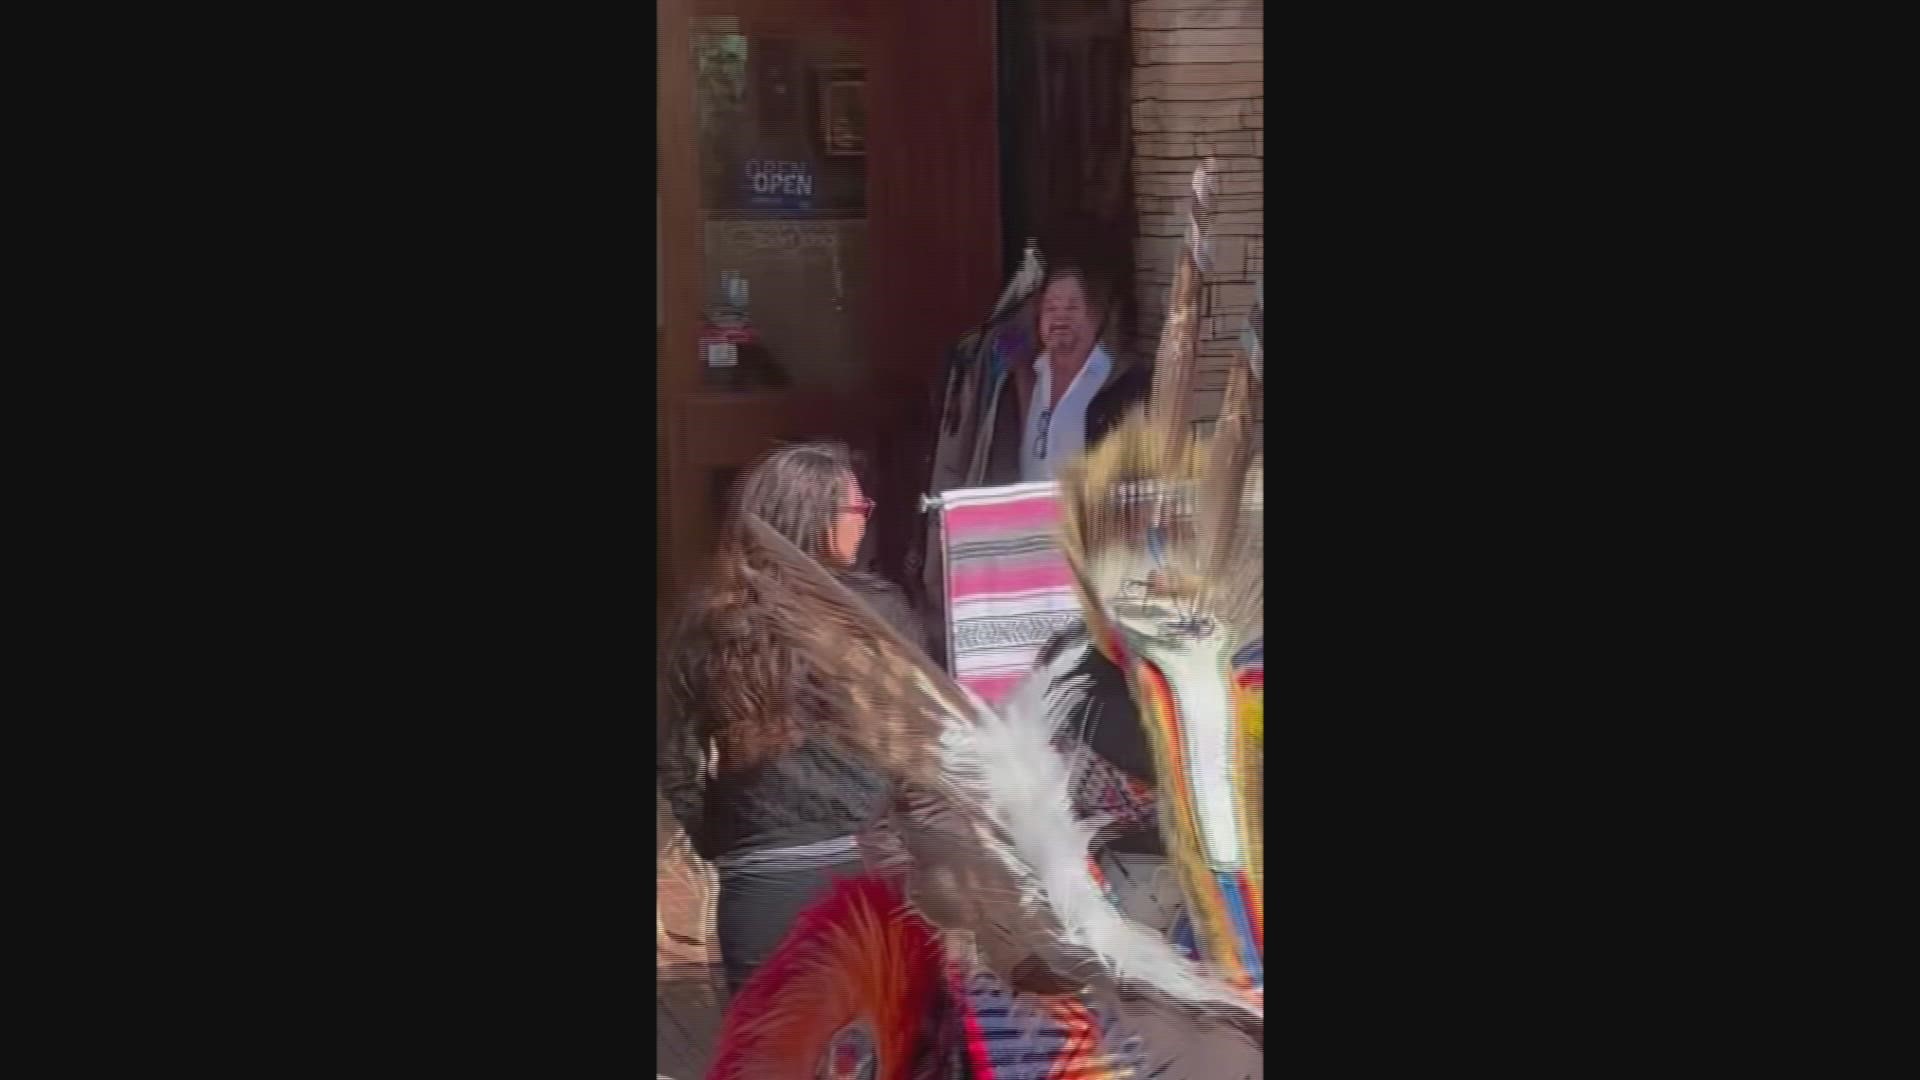 A racial confrontation was caught on camera as the owner of a Native American jewelry store hurled insults at Native American dancers.